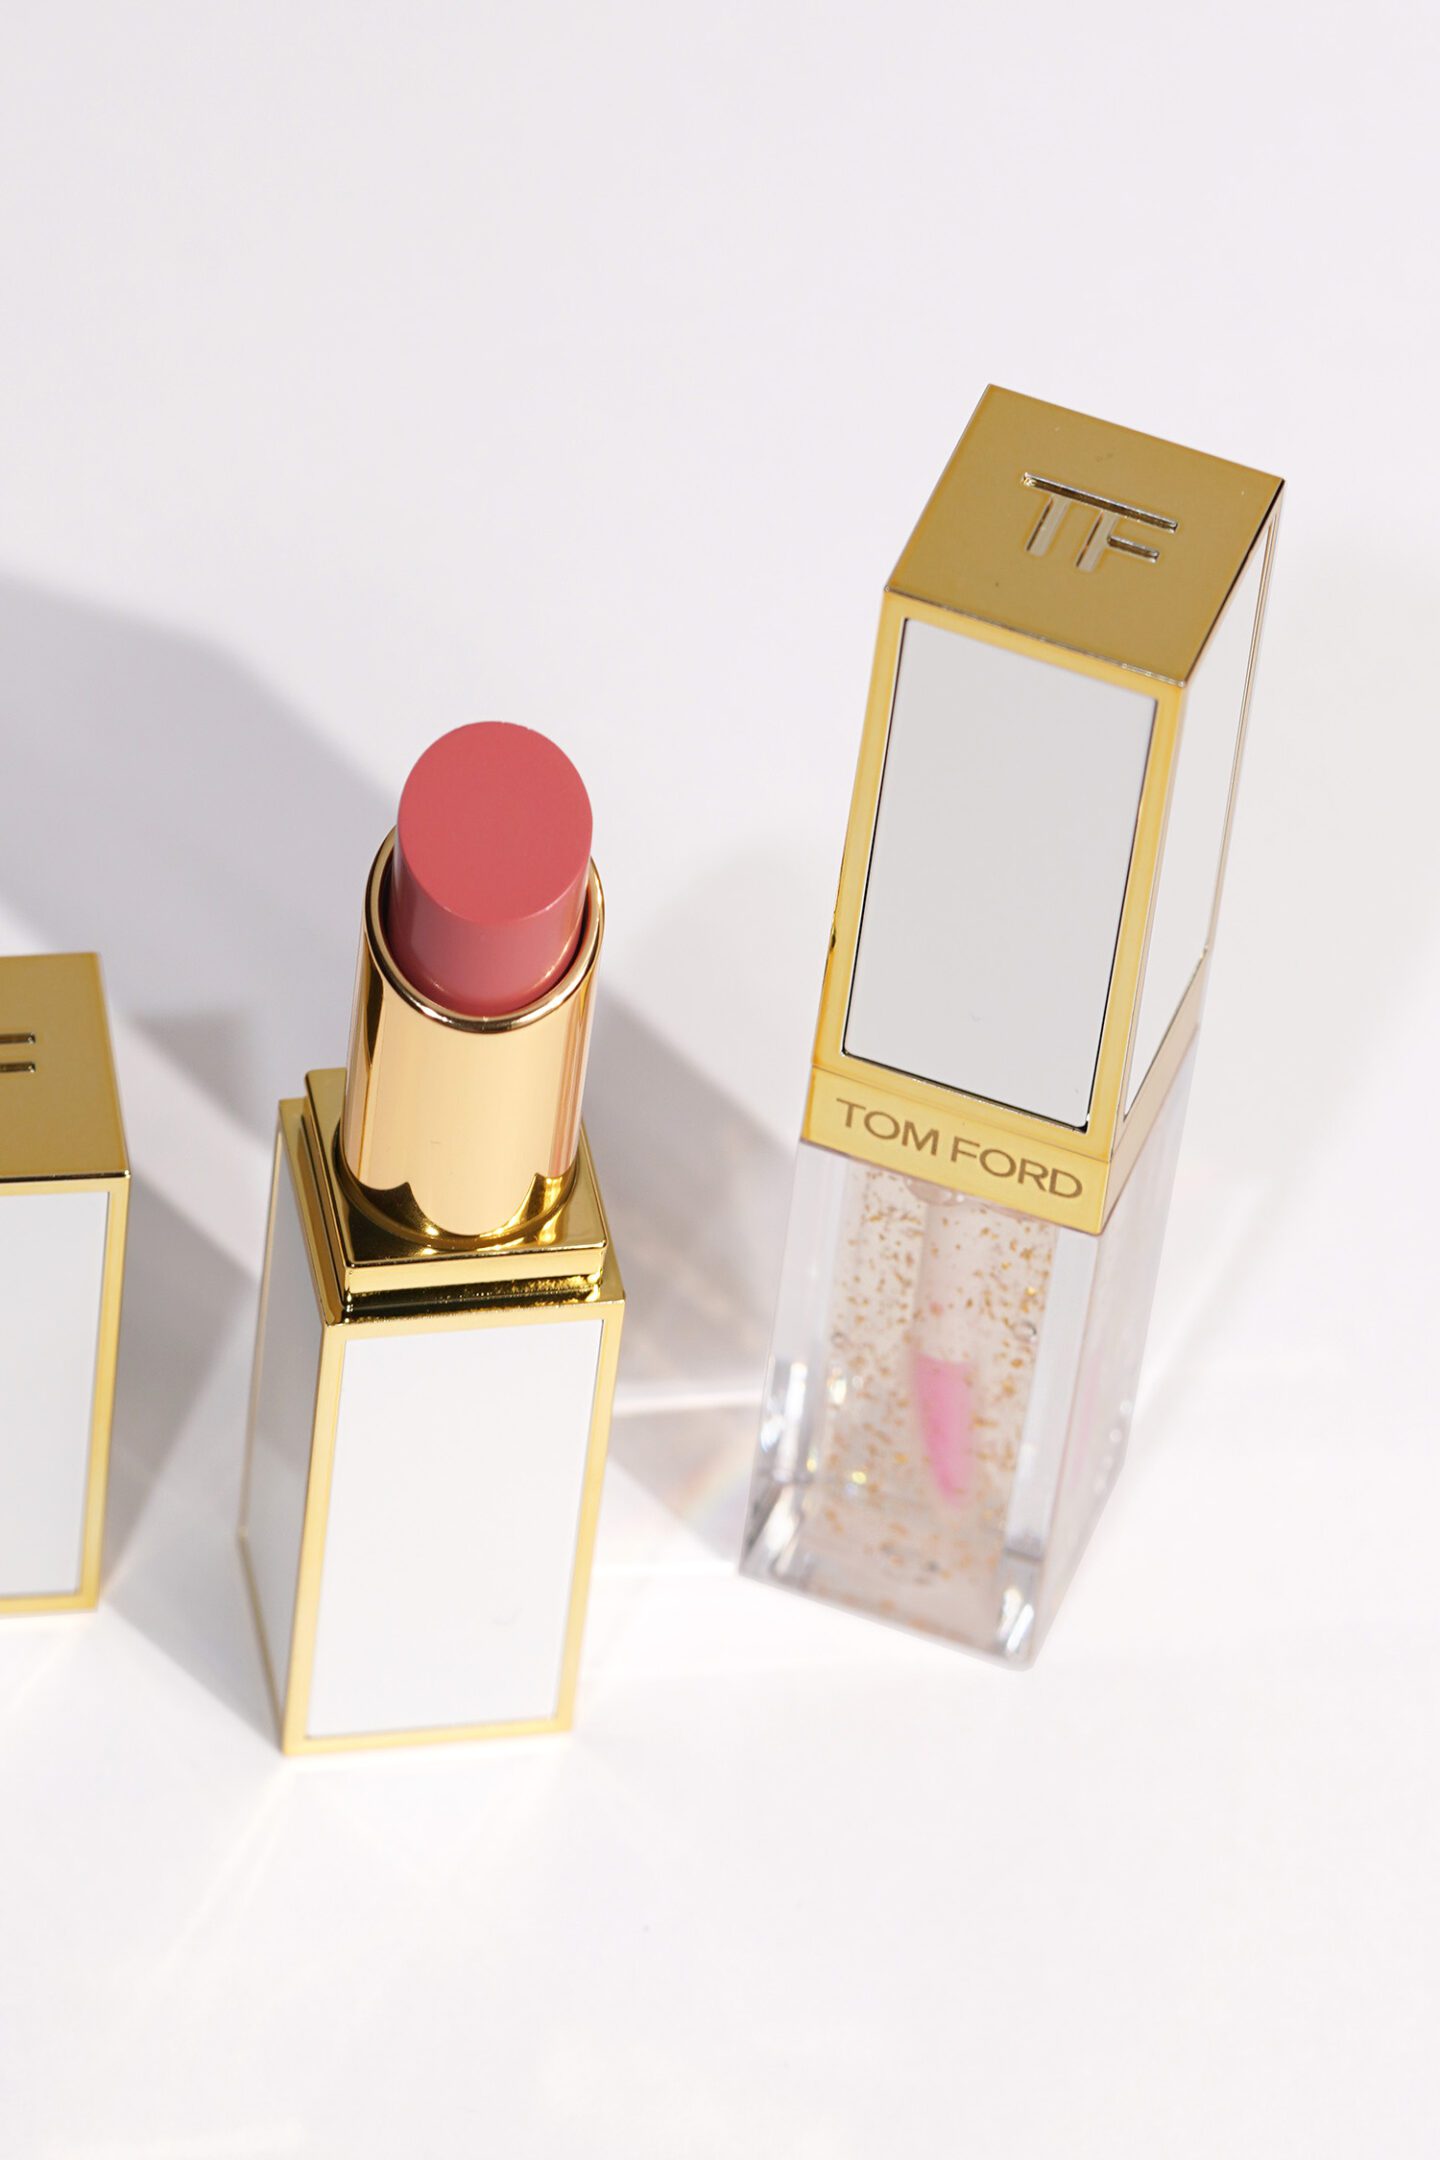 Tom Ford Beauty Soleil Glow Ultra Shine Lipstick in Plage Nue and Liquid Lip Blush